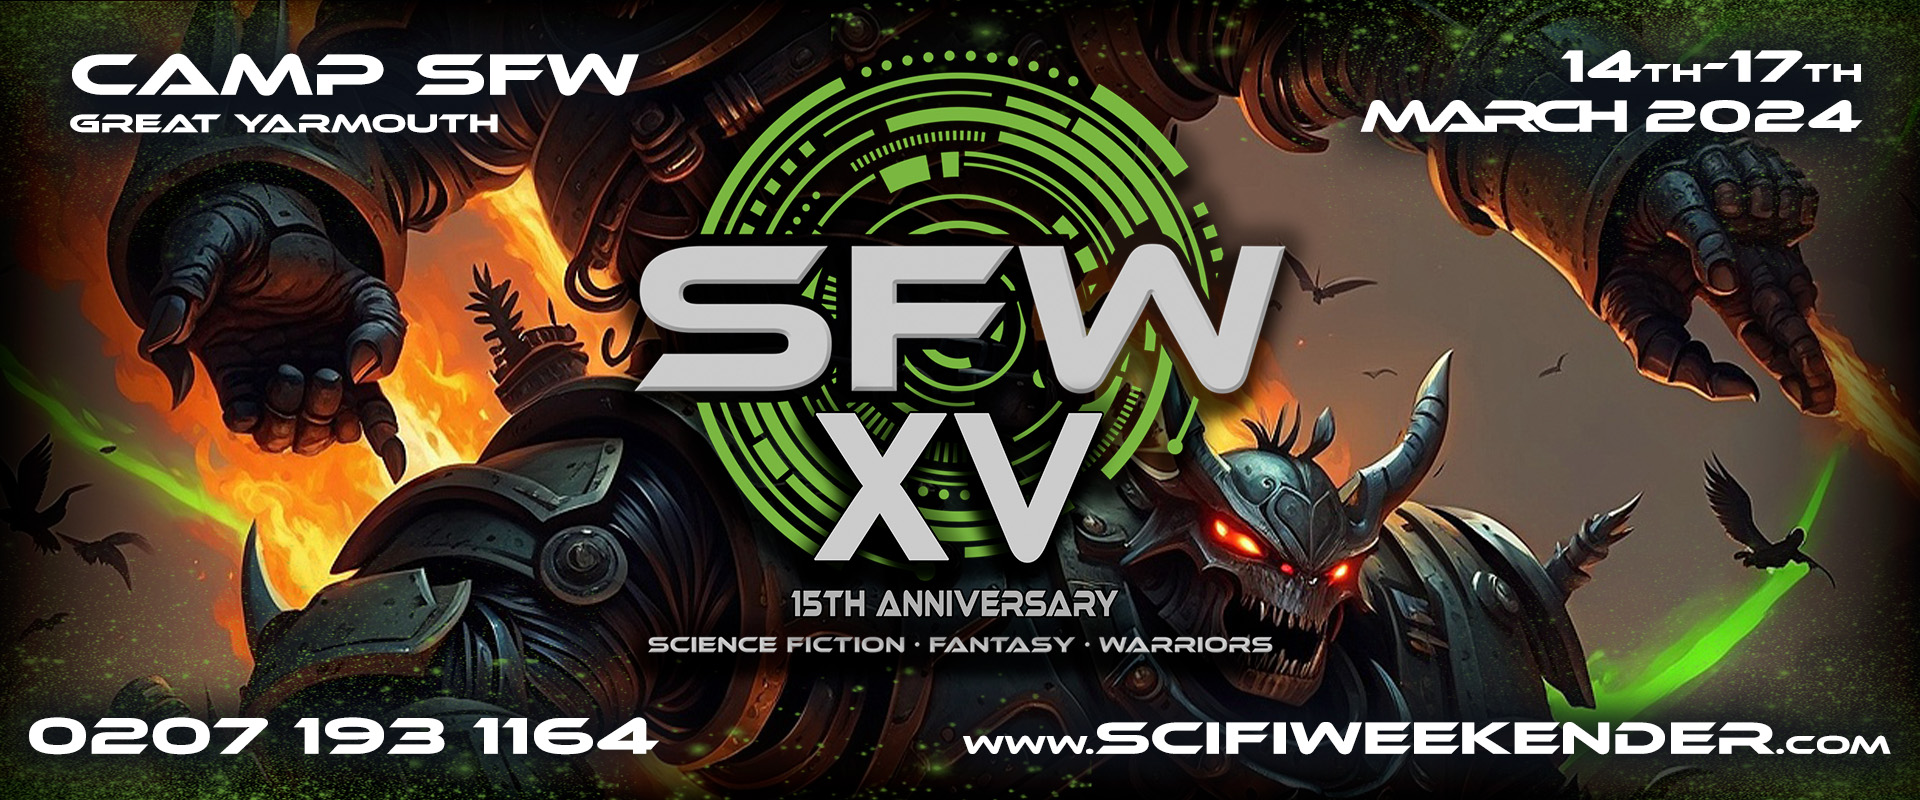 SFW XV – 15 more Acts, Actors & Authors Join the 15th Anniversary as Geek Camp Drops to Last 3 Rooms…Nearly Sold Out!